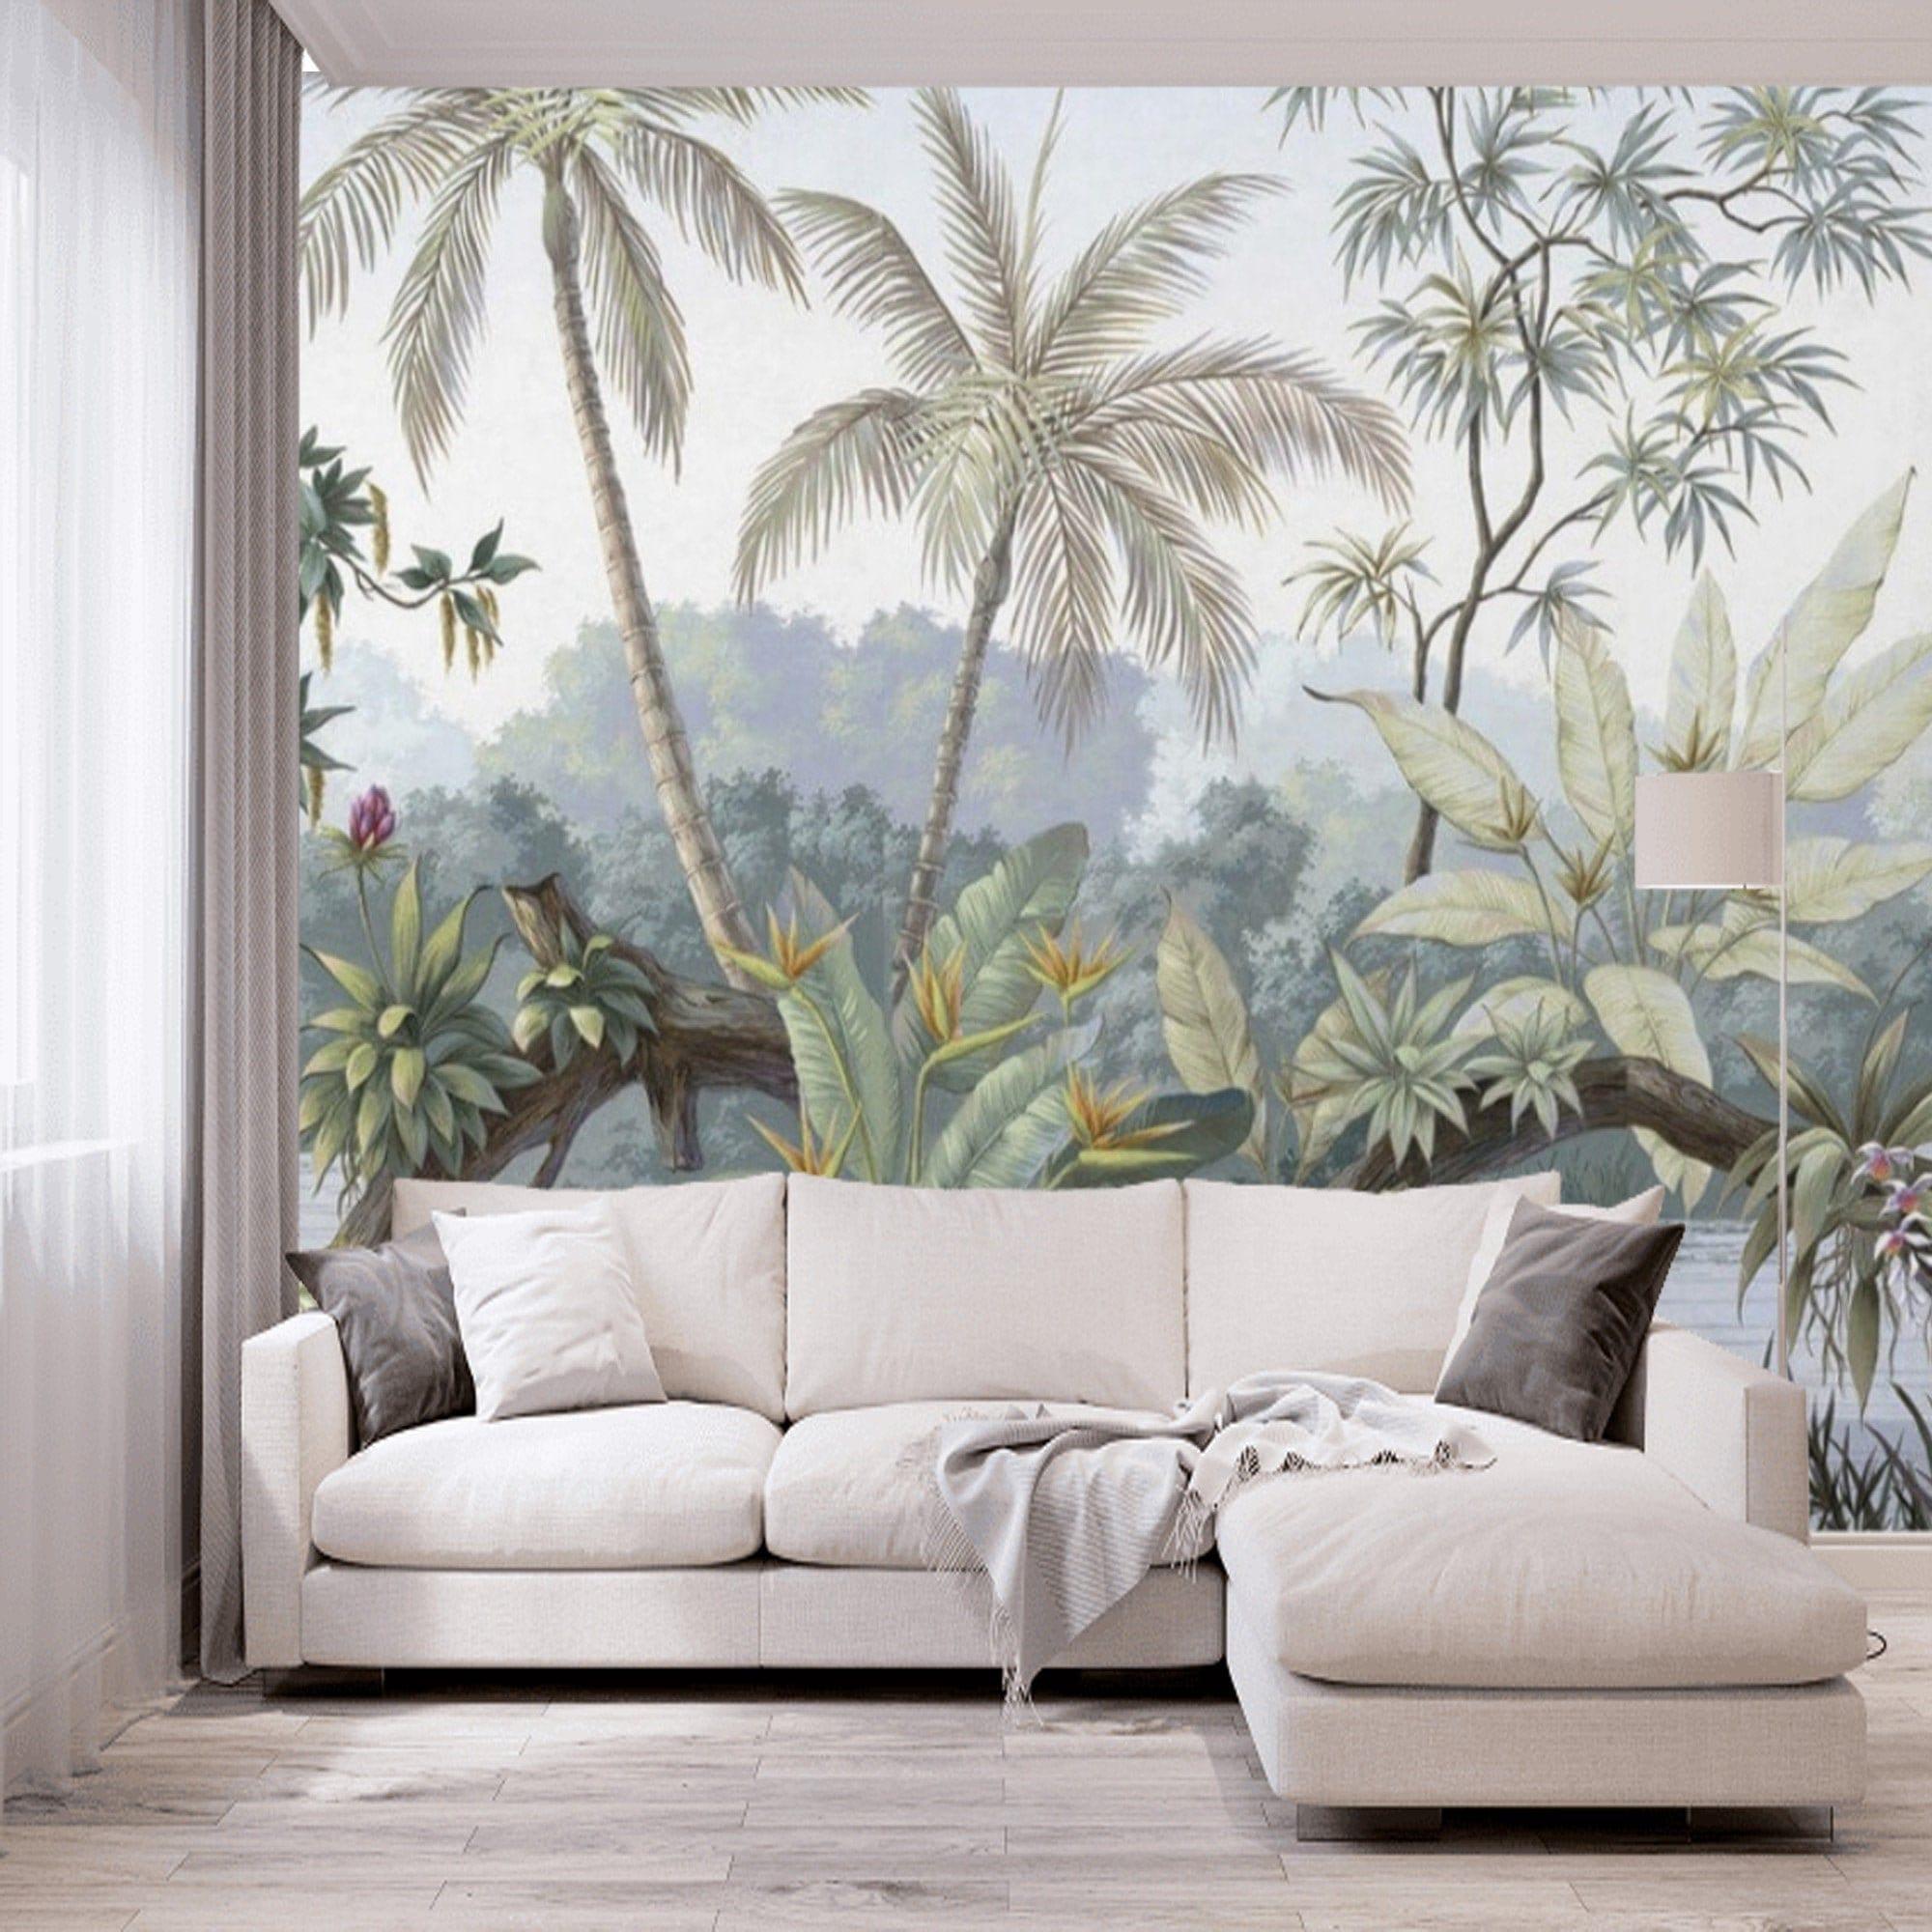 2000 x 2000 · jpeg - Tropical Wallpaper Mural Removable Jungle Wall Mural Peel and | Etsy